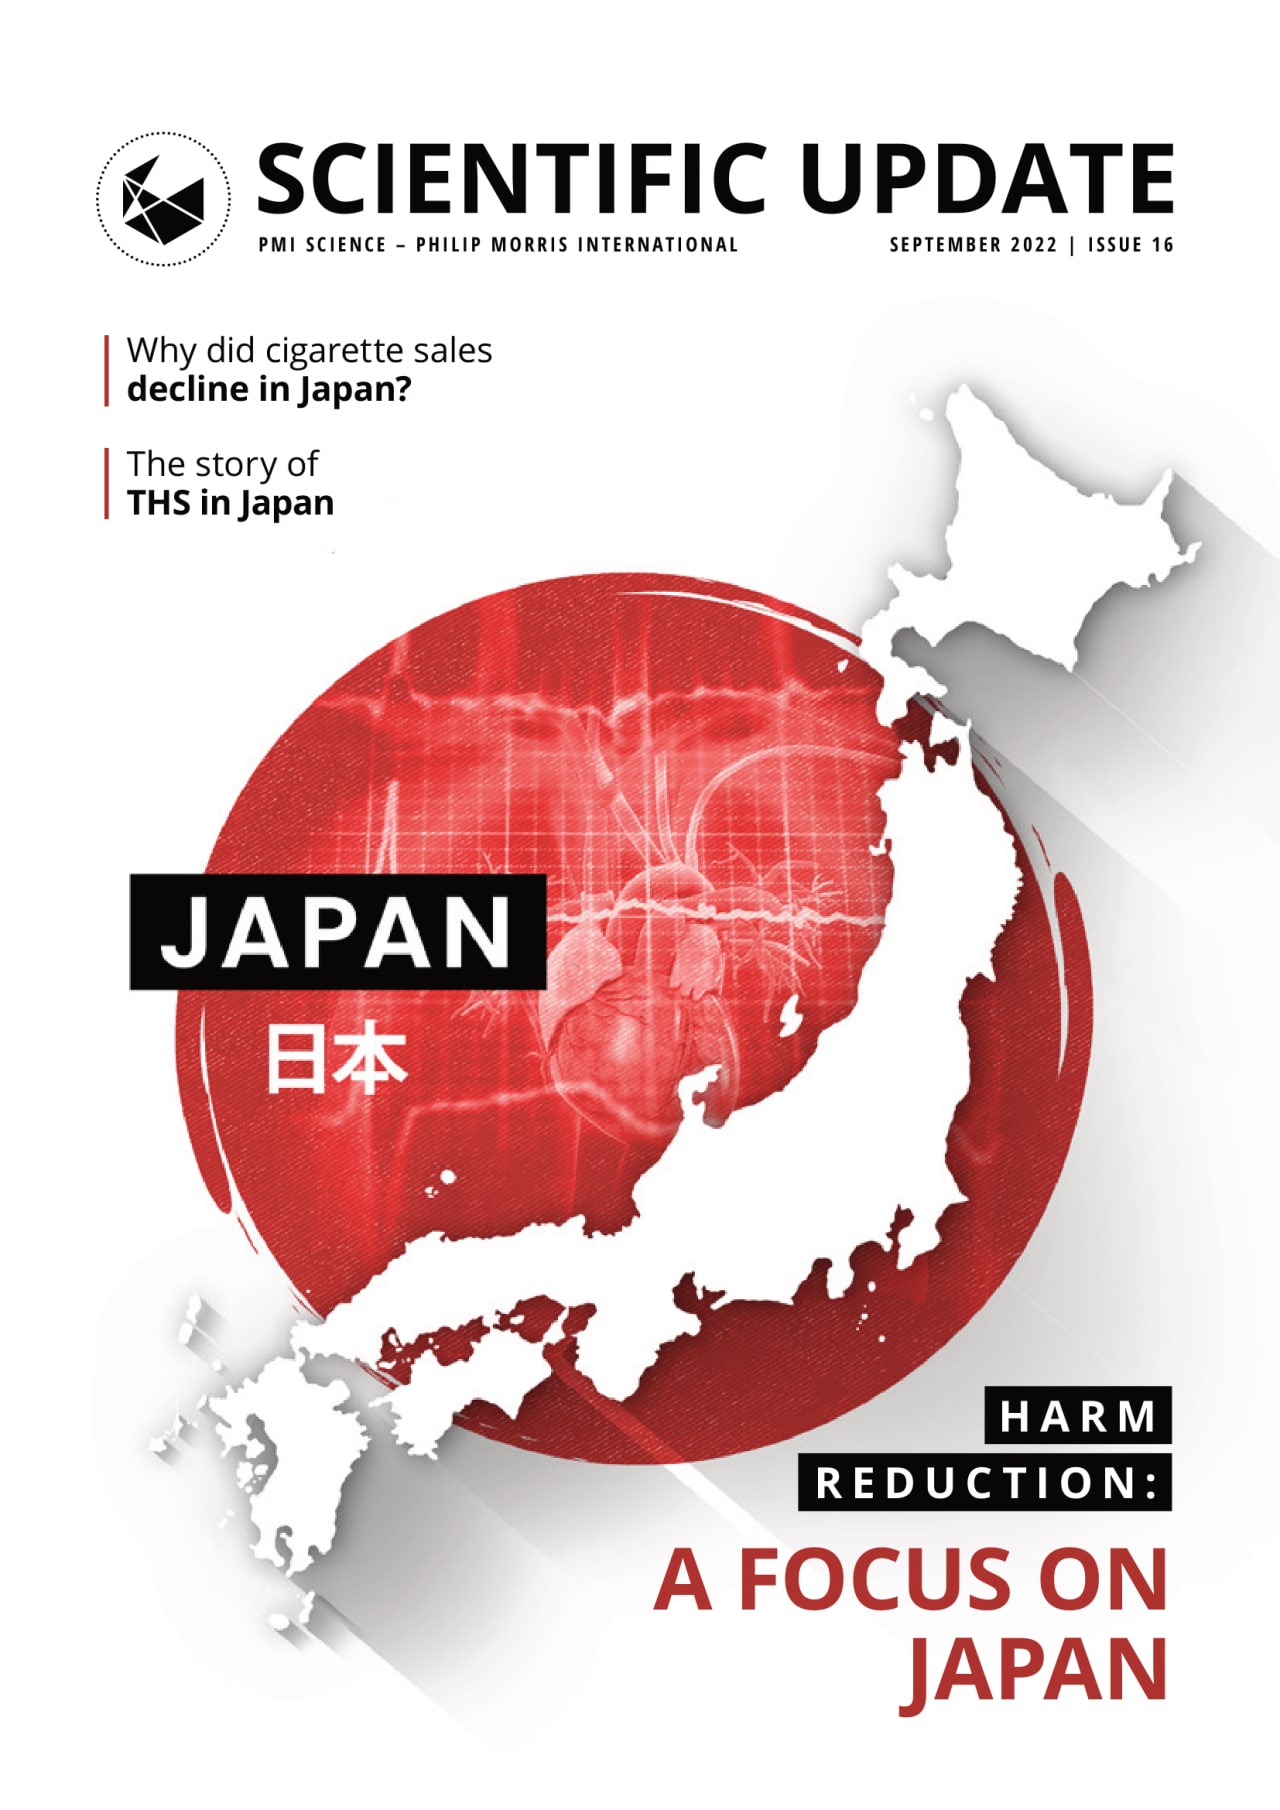 Tobacco harm reduction in Japan